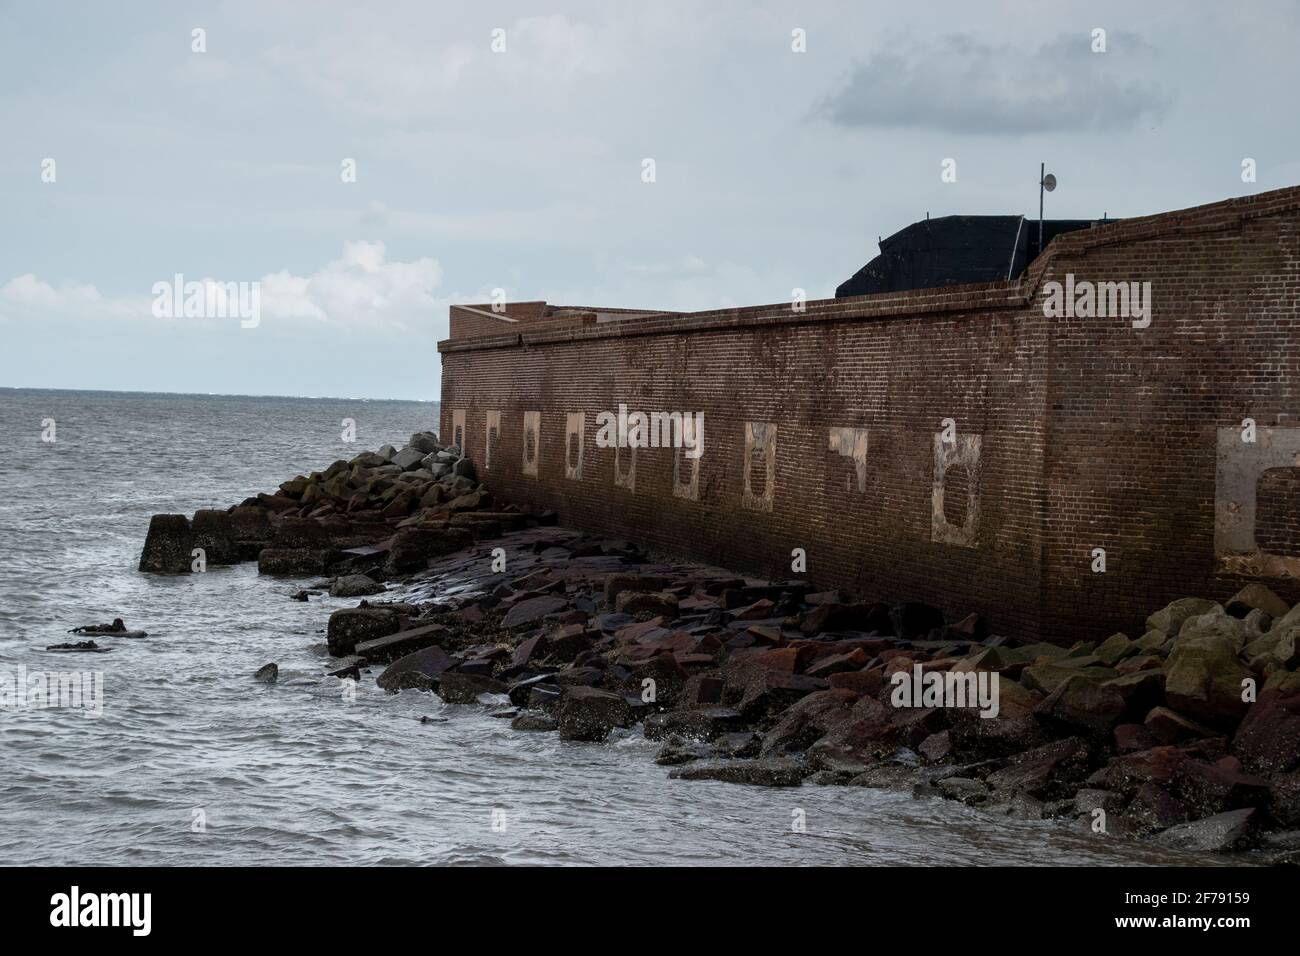 The side wall of Fort Sumter in Charleston, South Carolina Stock Photo